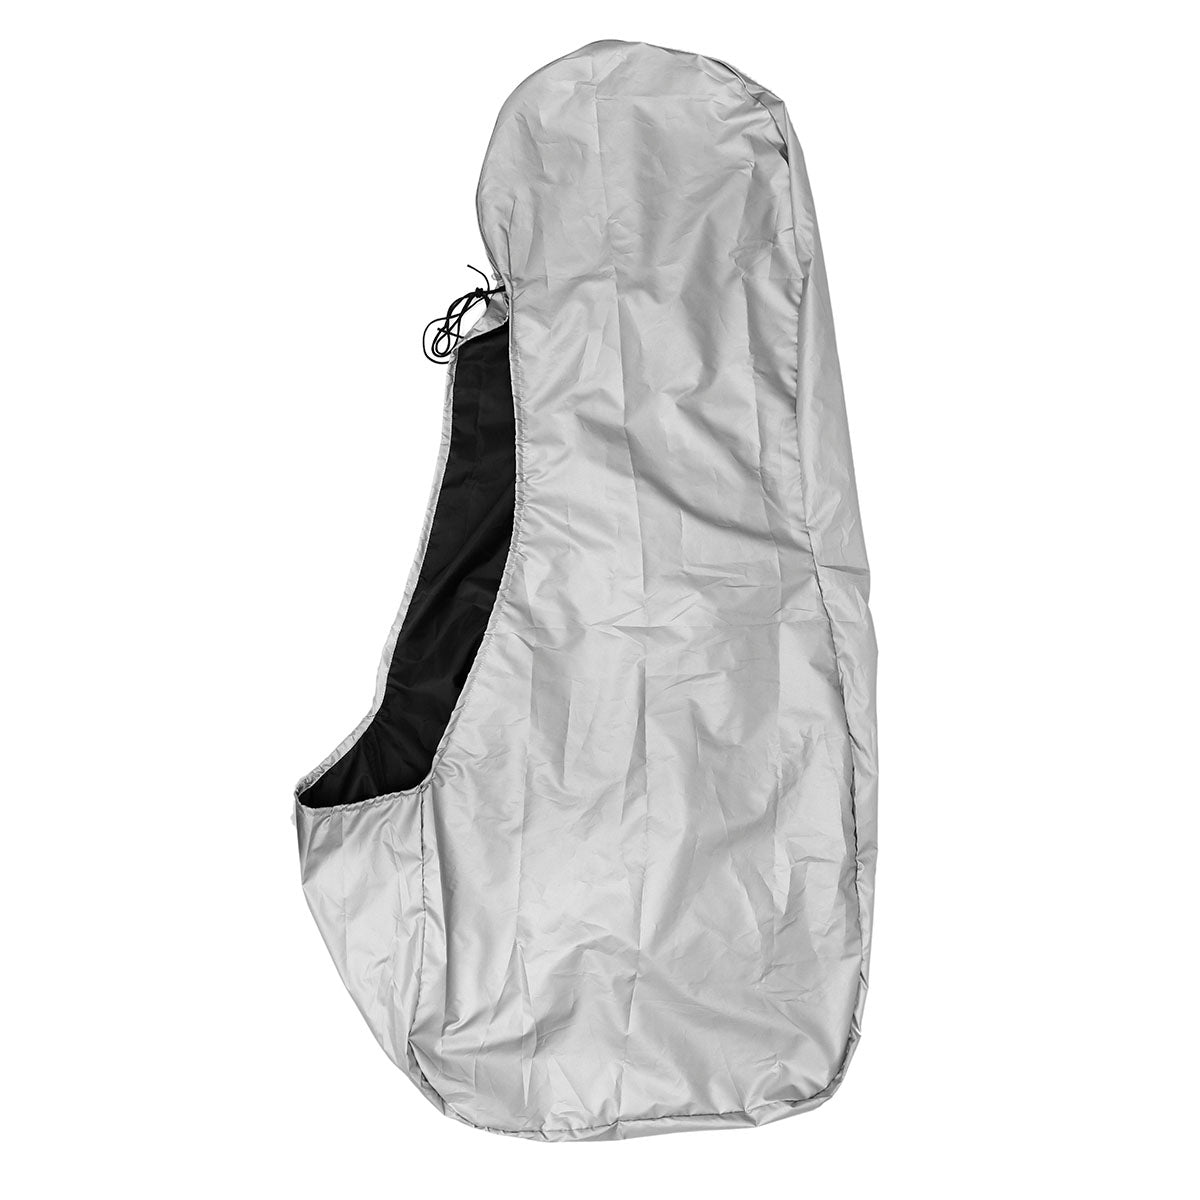 Gray Full Outboard Boat Motor Cover Waterproof Dust Protection 60-90HP Silver 5 Sizes